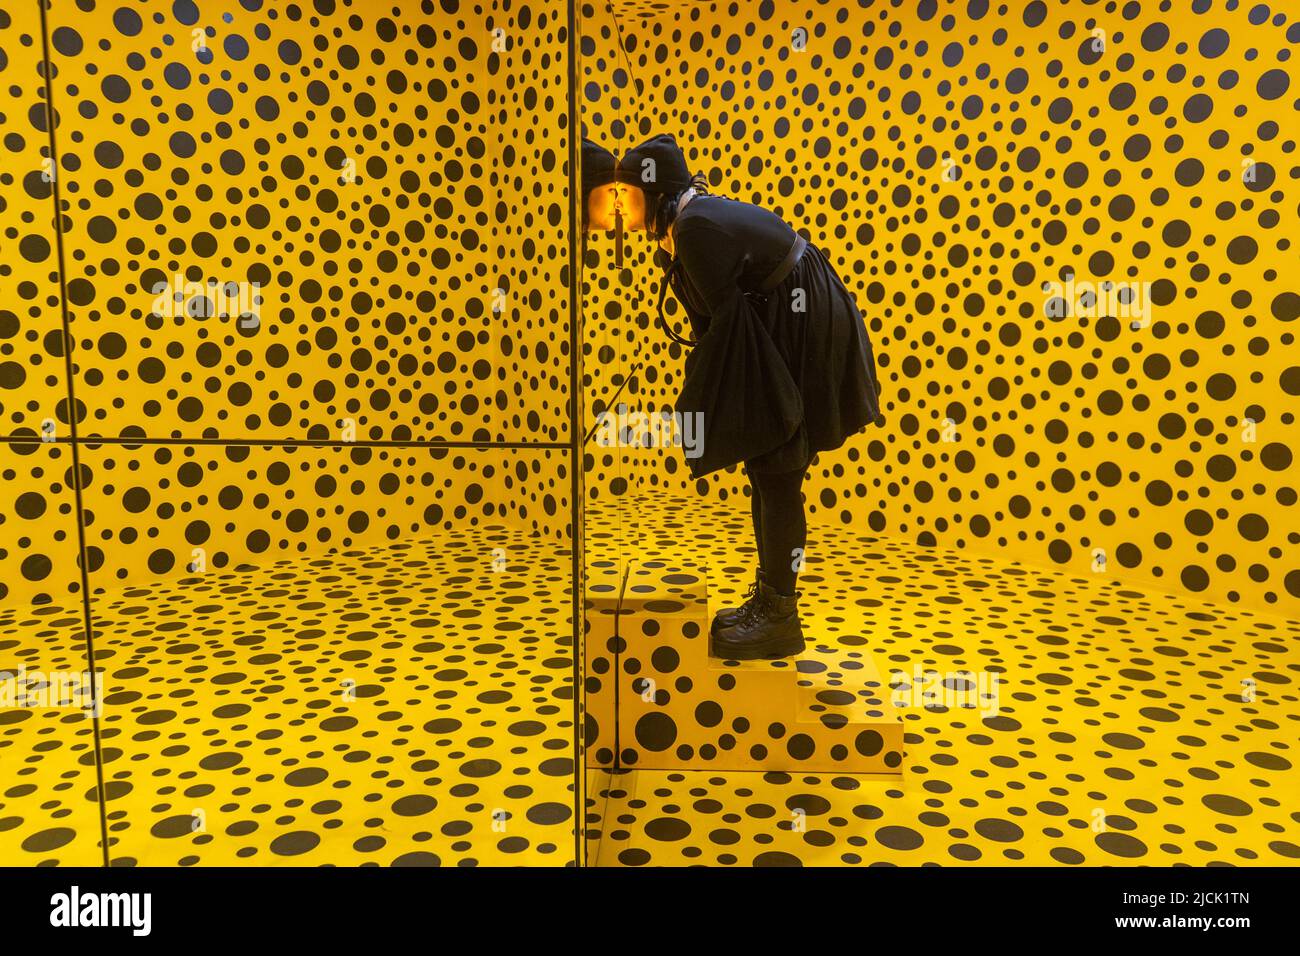 AP Interview: Artist Kusama sees the world in dots - The San Diego